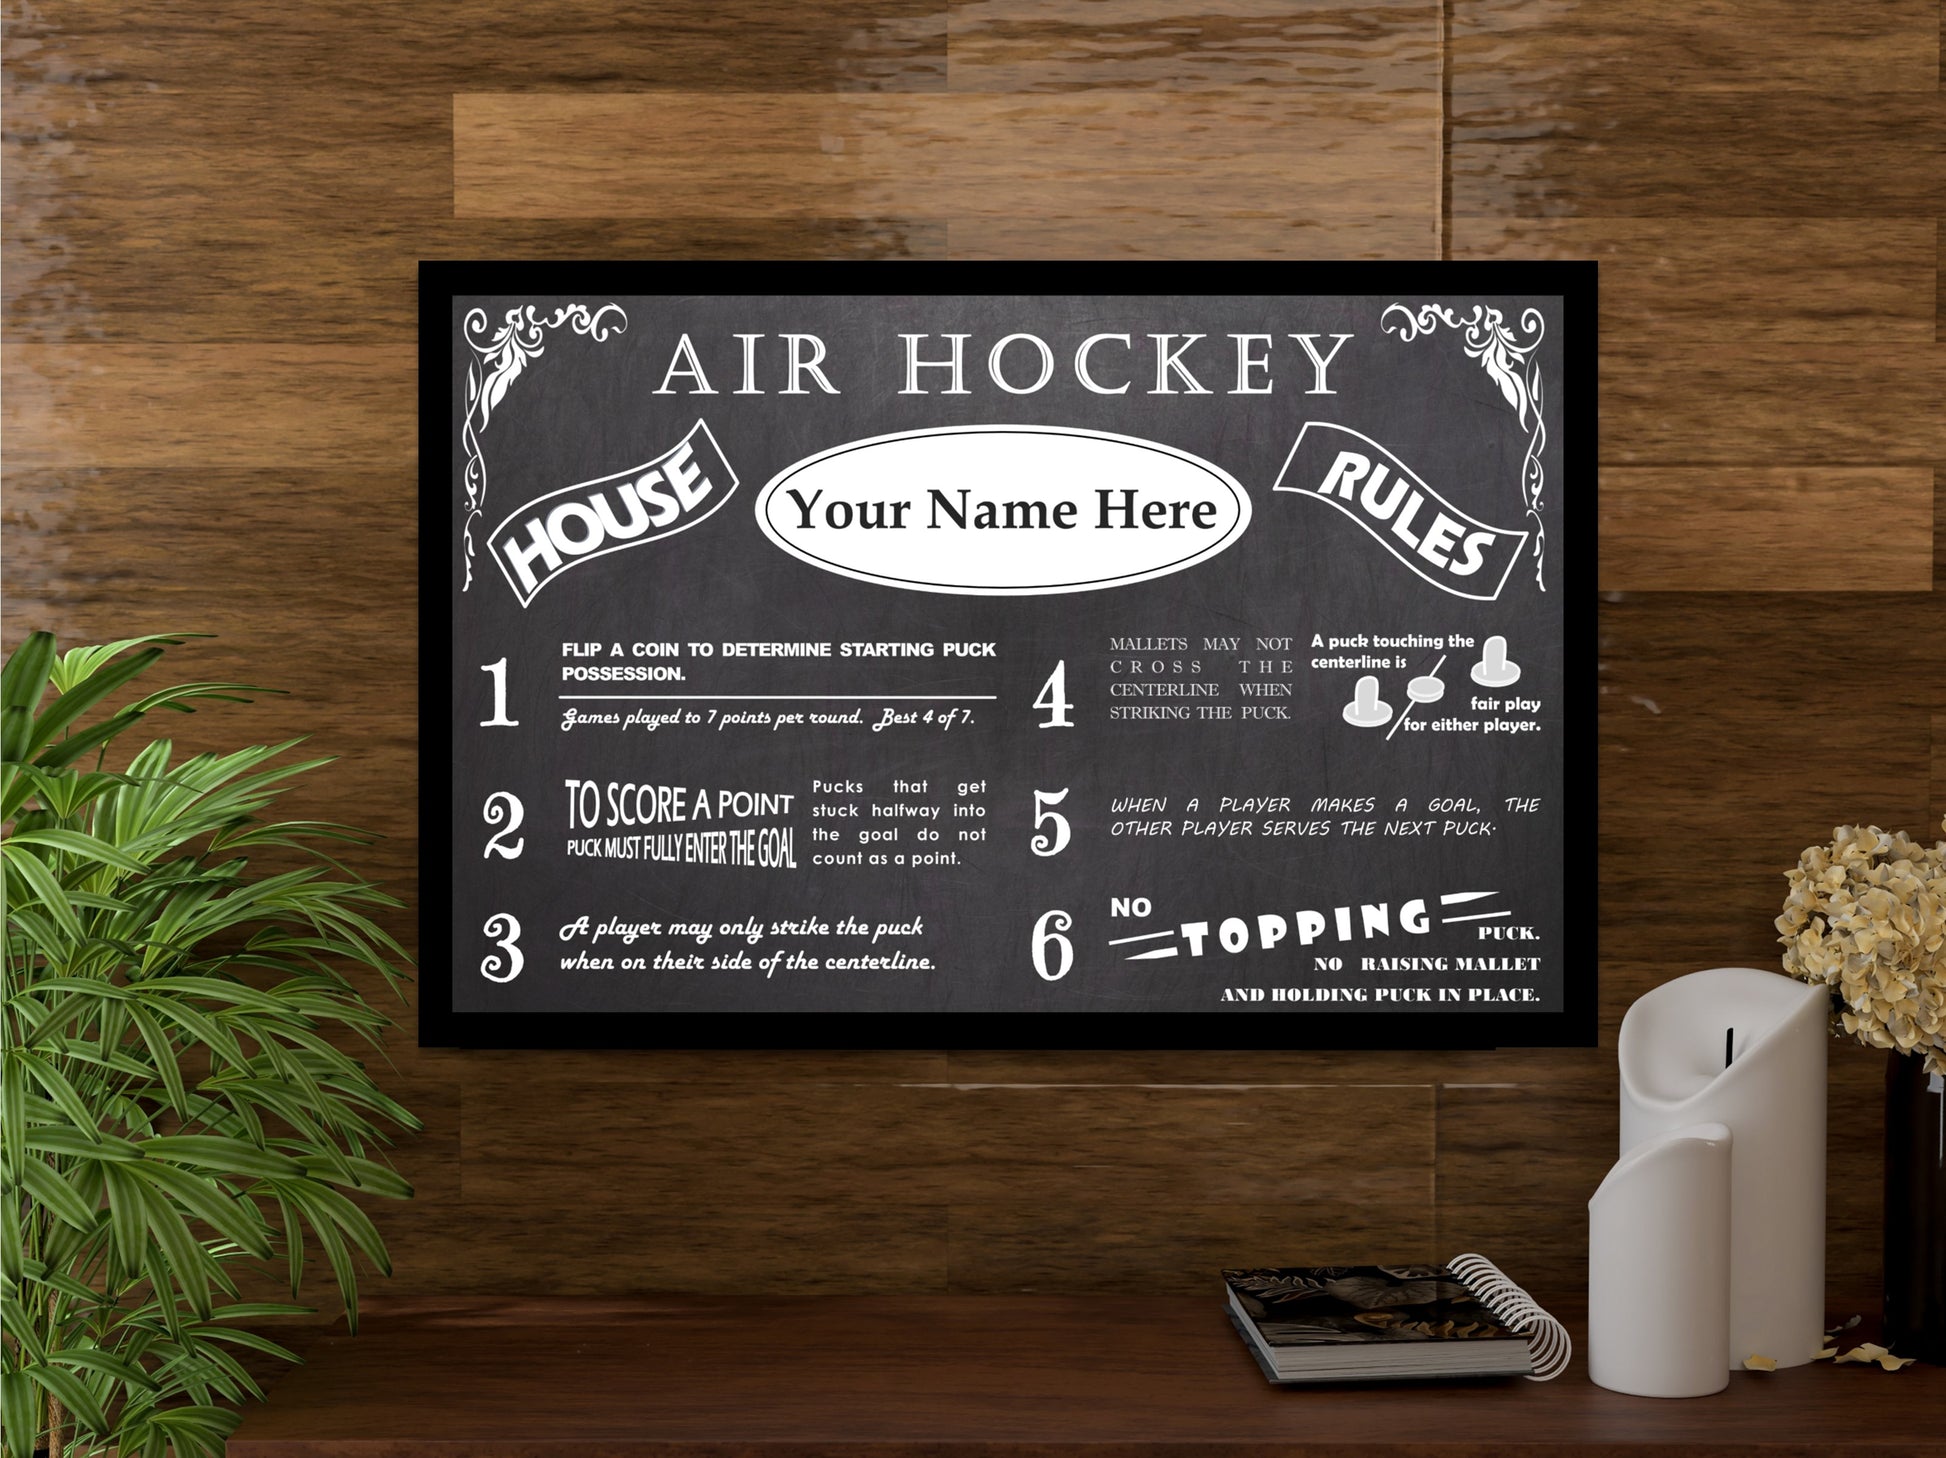 Air Hockey House Rules Personalized and Customized With Your Name!